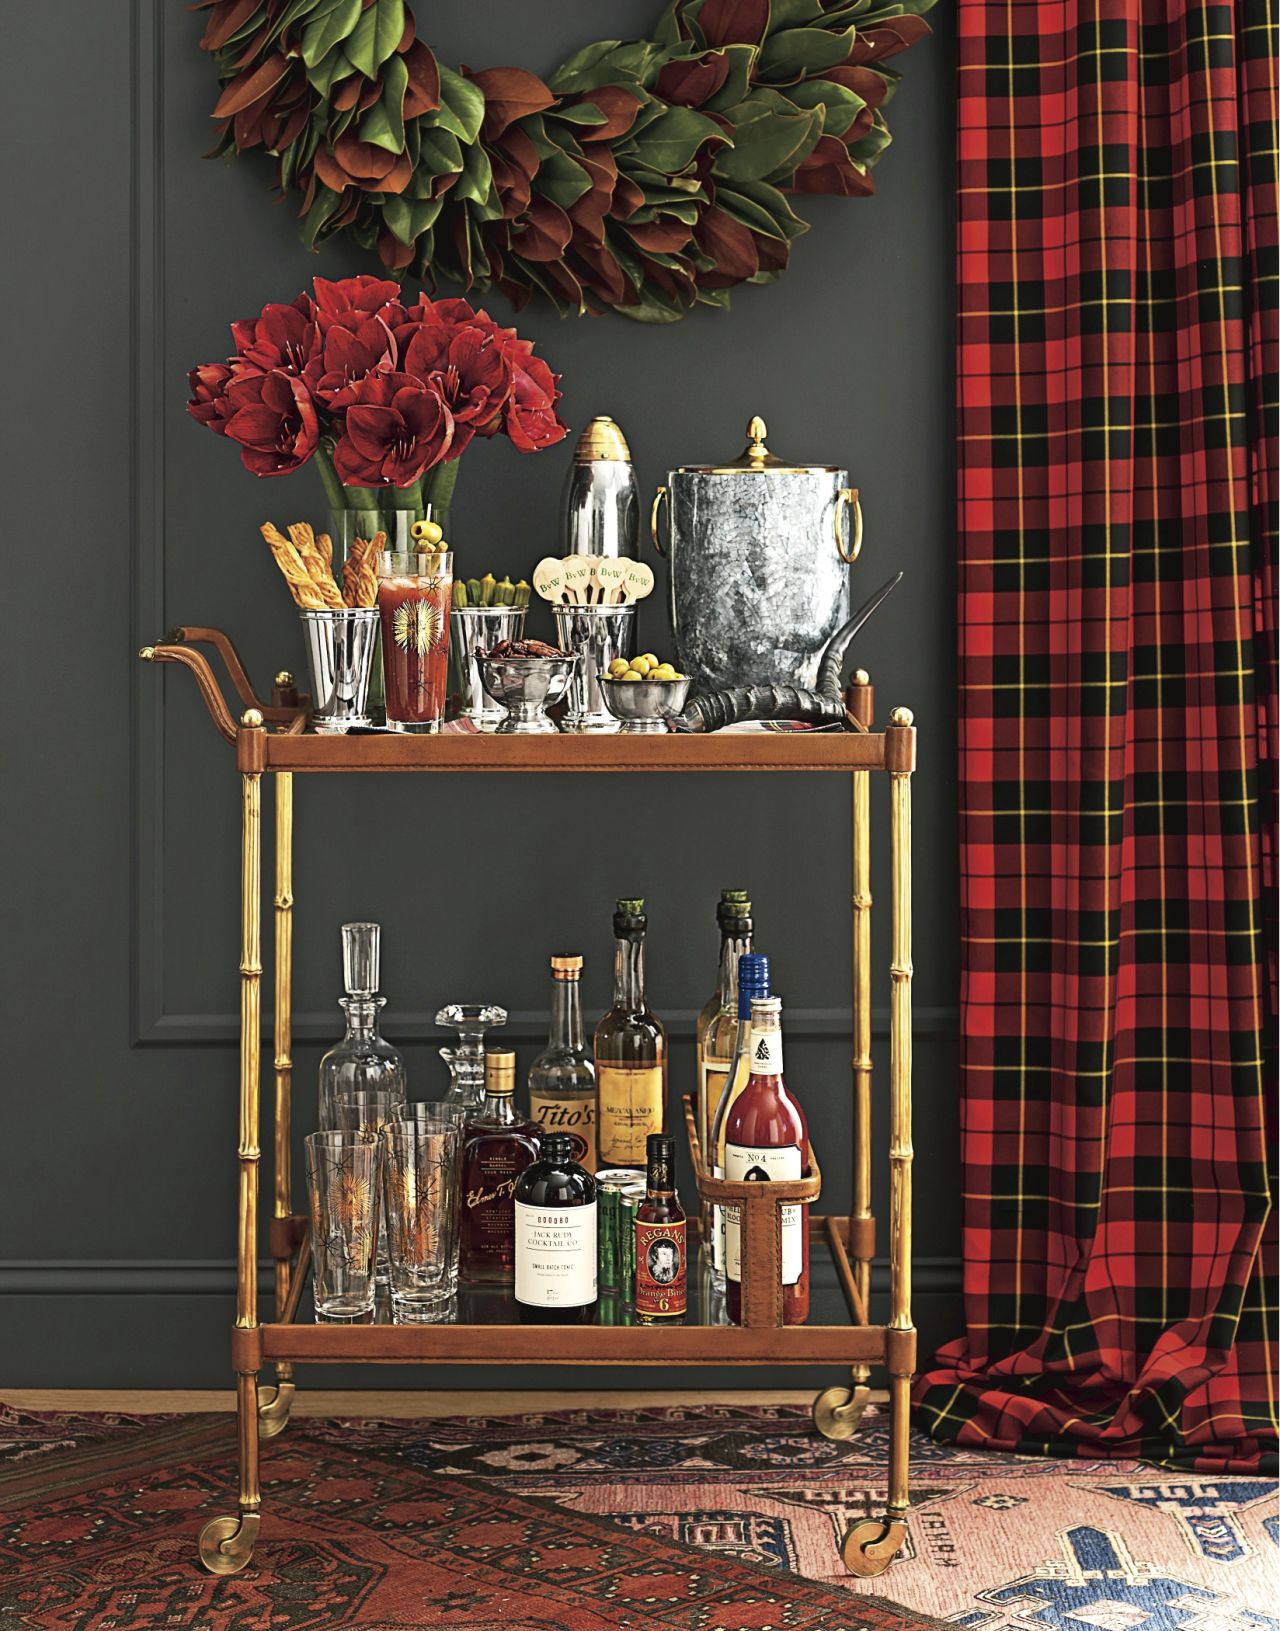 This bar cart gets a holiday treatment with silver bowls and an arrangement of amaryllis, but could easily transition to everyday decor.